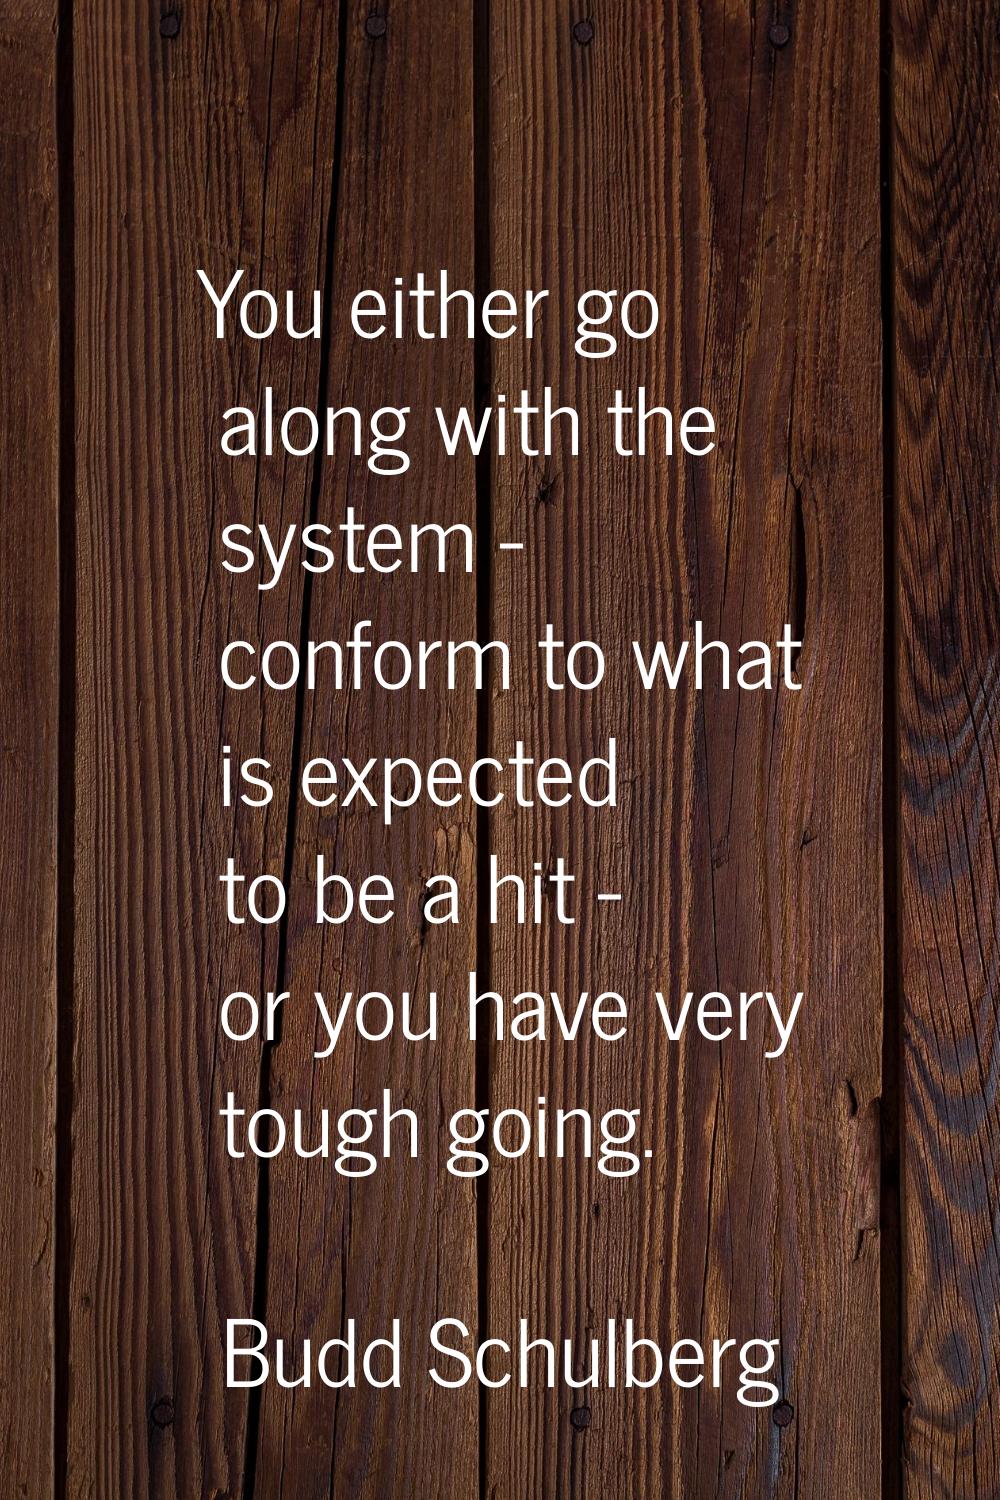 You either go along with the system - conform to what is expected to be a hit - or you have very to